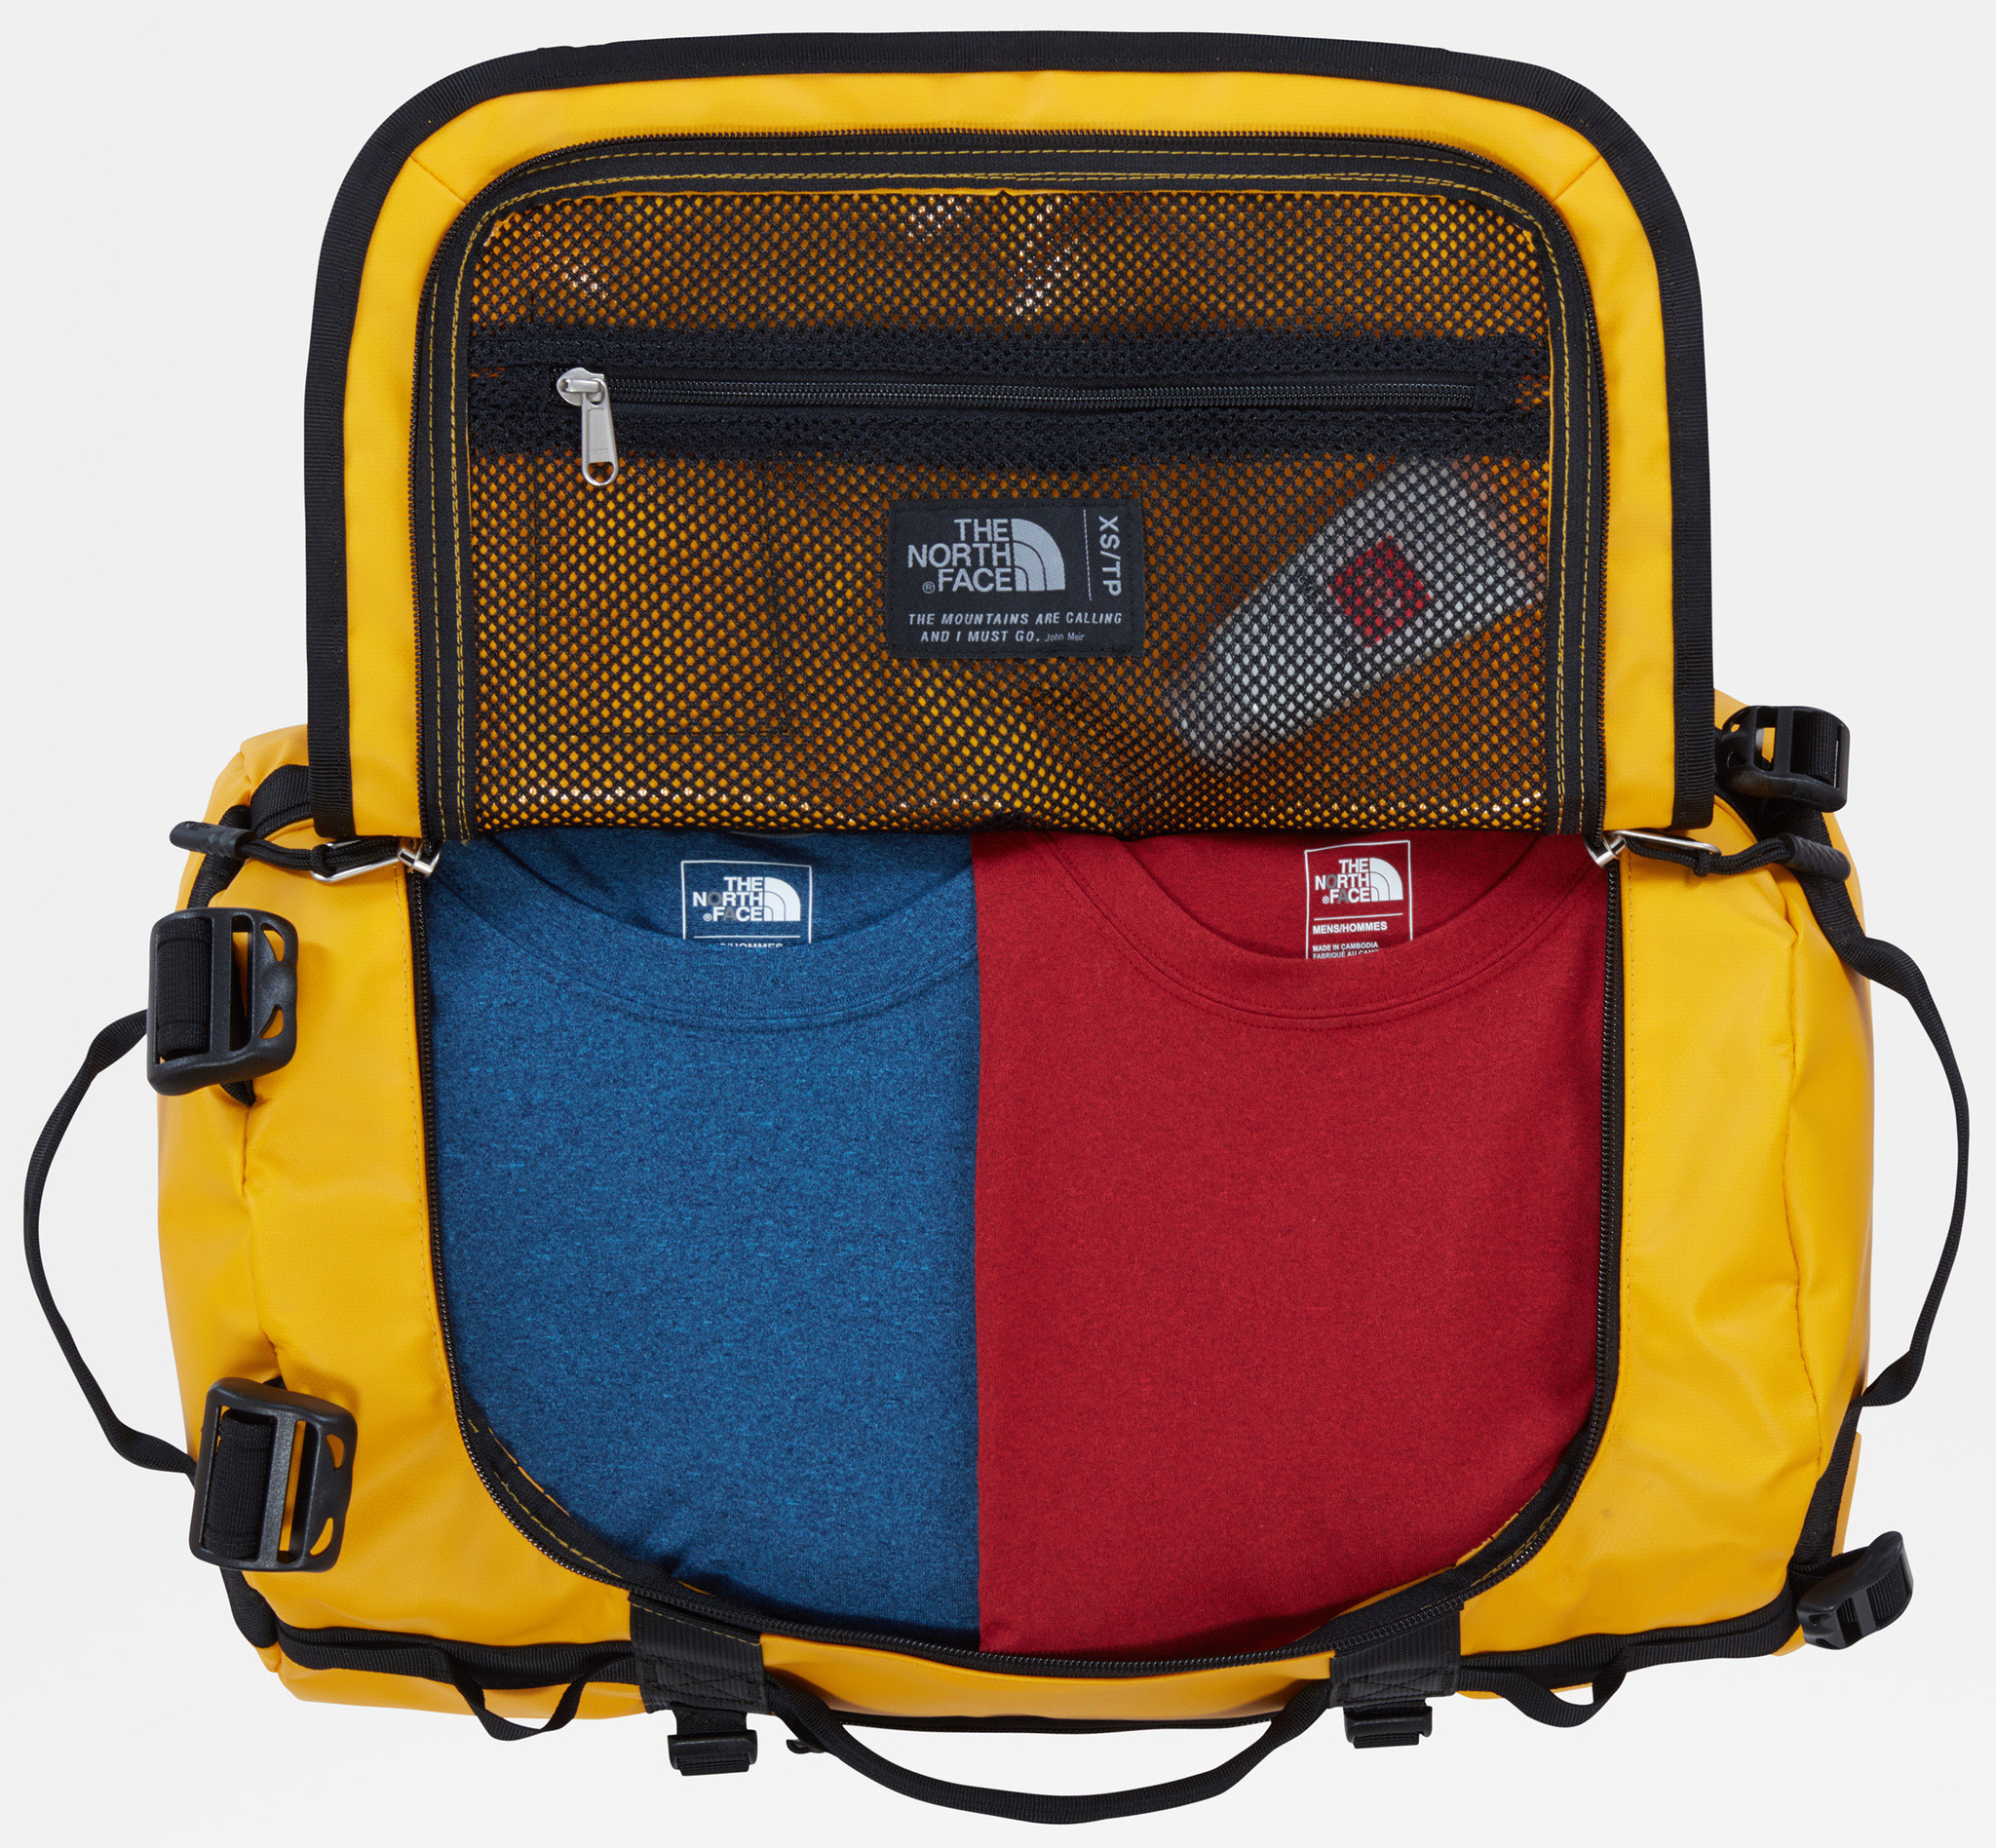 Face camp. The North face Base Camp Duffel XS. The North face Base Camp Duffel Yellow. Keego.